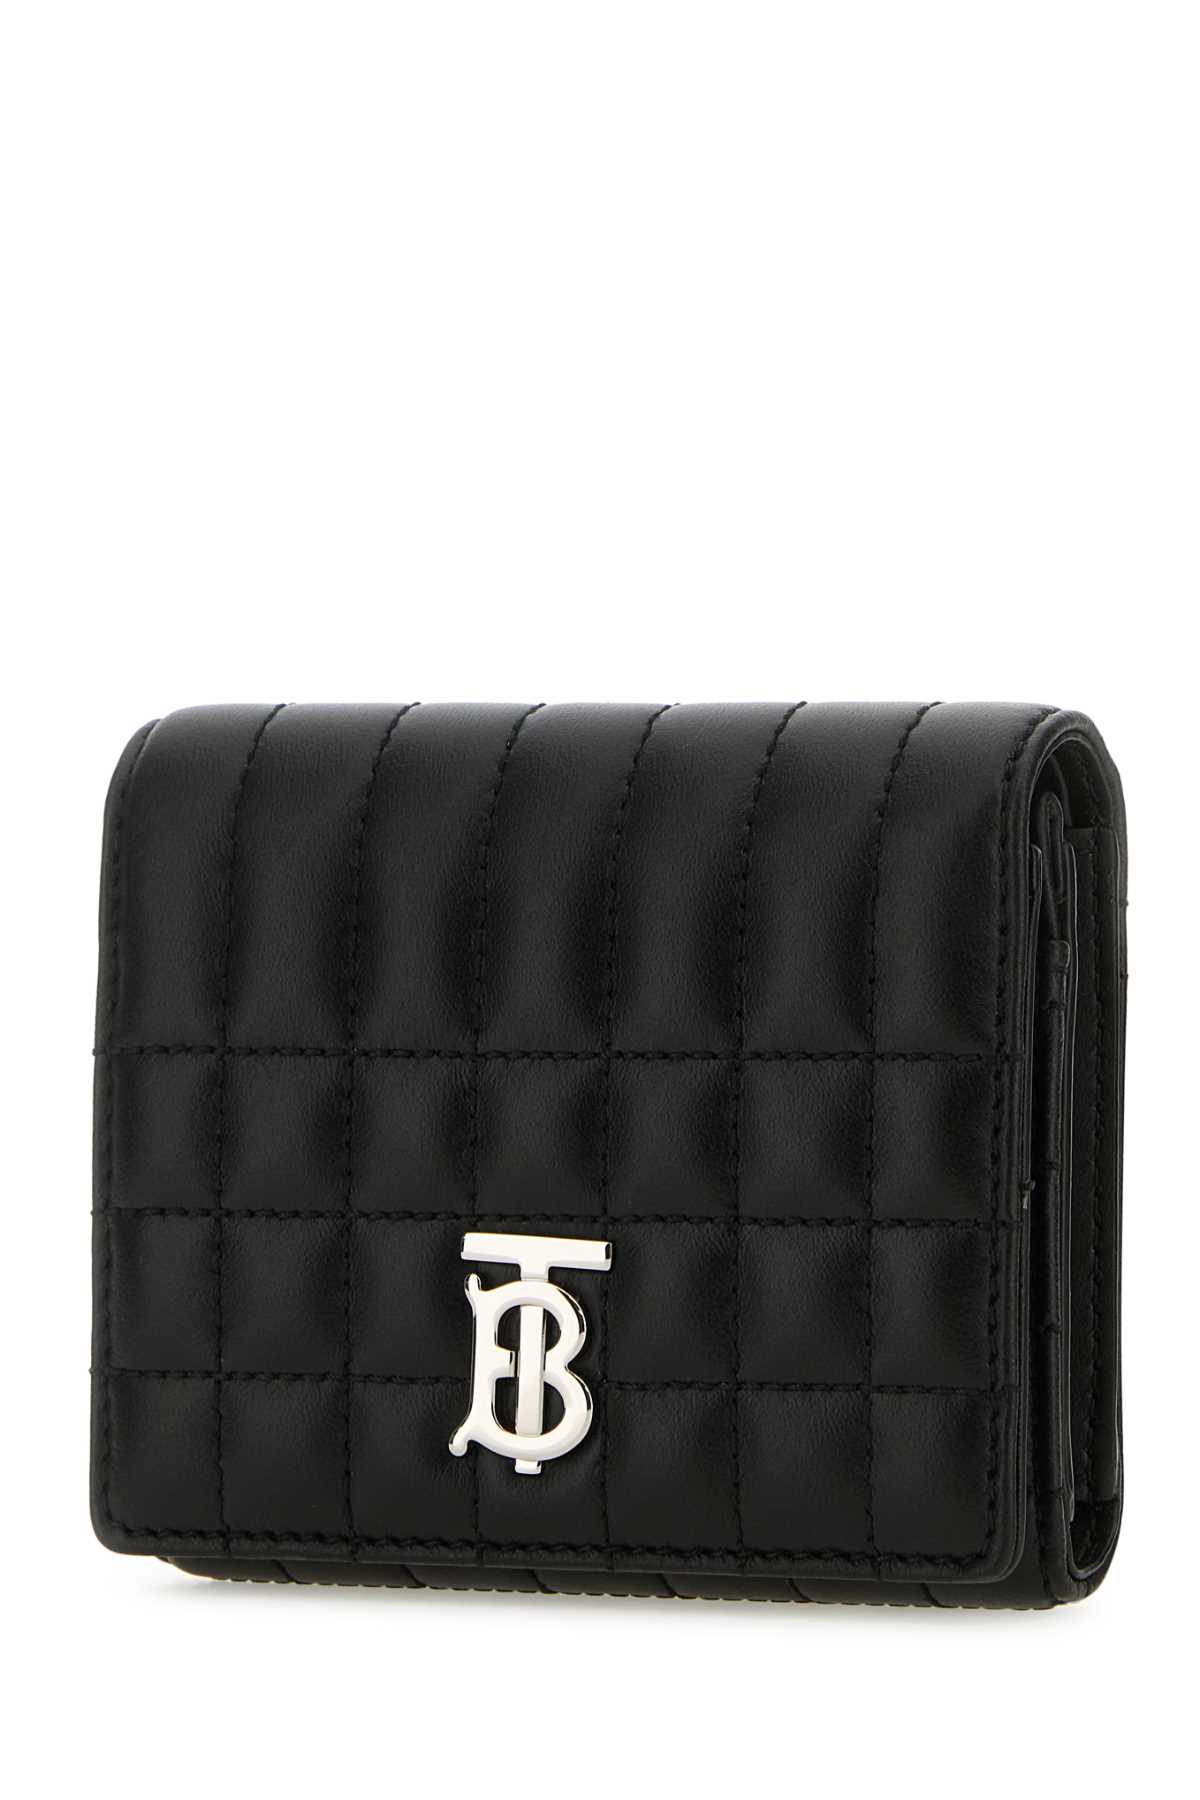 BURBERRY BLACK LEATHER SMALL LOLA WALLET